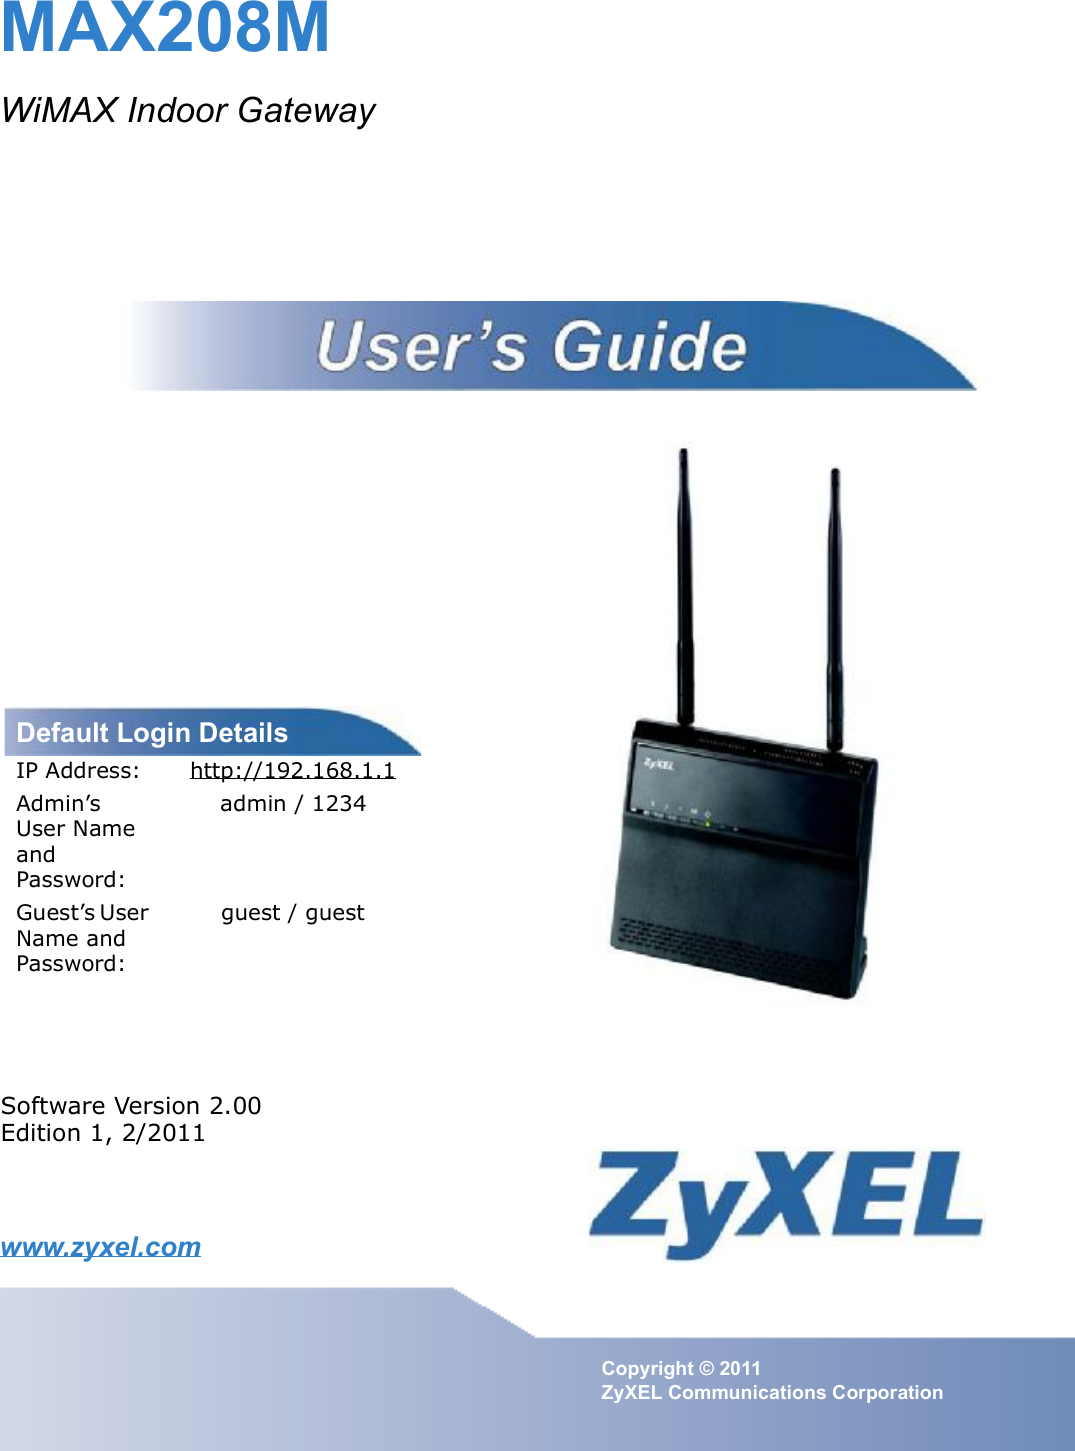 www.zyxel.comwww.zyxel.comMAX208MWiMAX Indoor GatewayCopyright © 2011ZyXEL Communications CorporationSoftware Version 2.00Edition 1, 2/2011Default Login DetailsIP Address: http://192.168.1.1Admin s User Name and Password:admin / 1234Guest s User Name and Password:guest / guest 